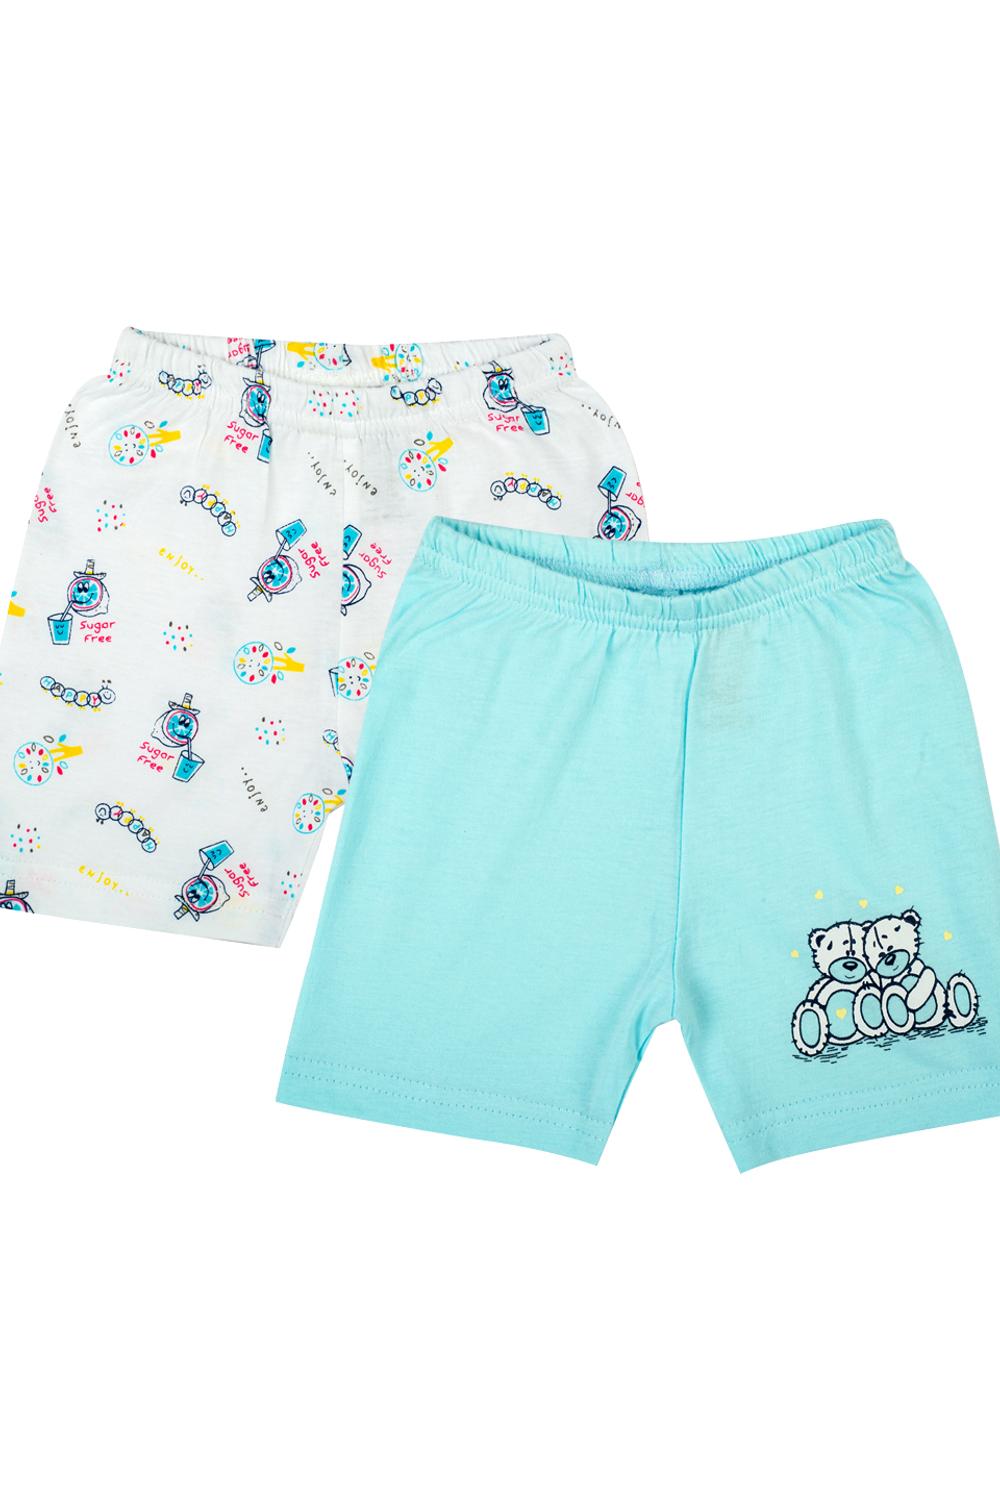 Mee Mee Shorts pack of 2 - Blue& White Printed